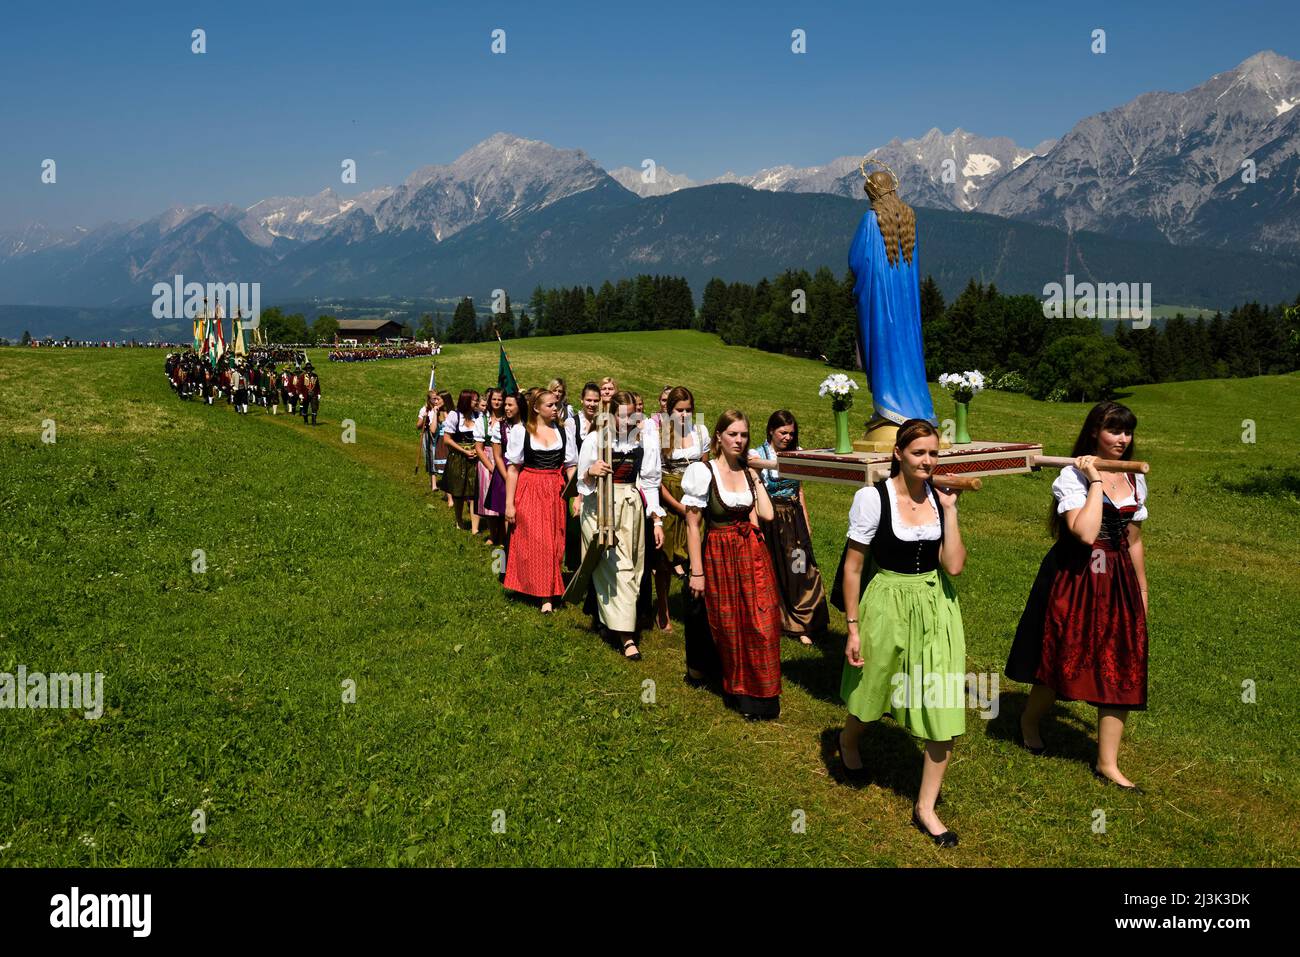 Leaving the village behind the procession enters a large meadow of grass overlooked by the mighty Karwendel mountain range. The Herz-Jesu festival was Stock Photo